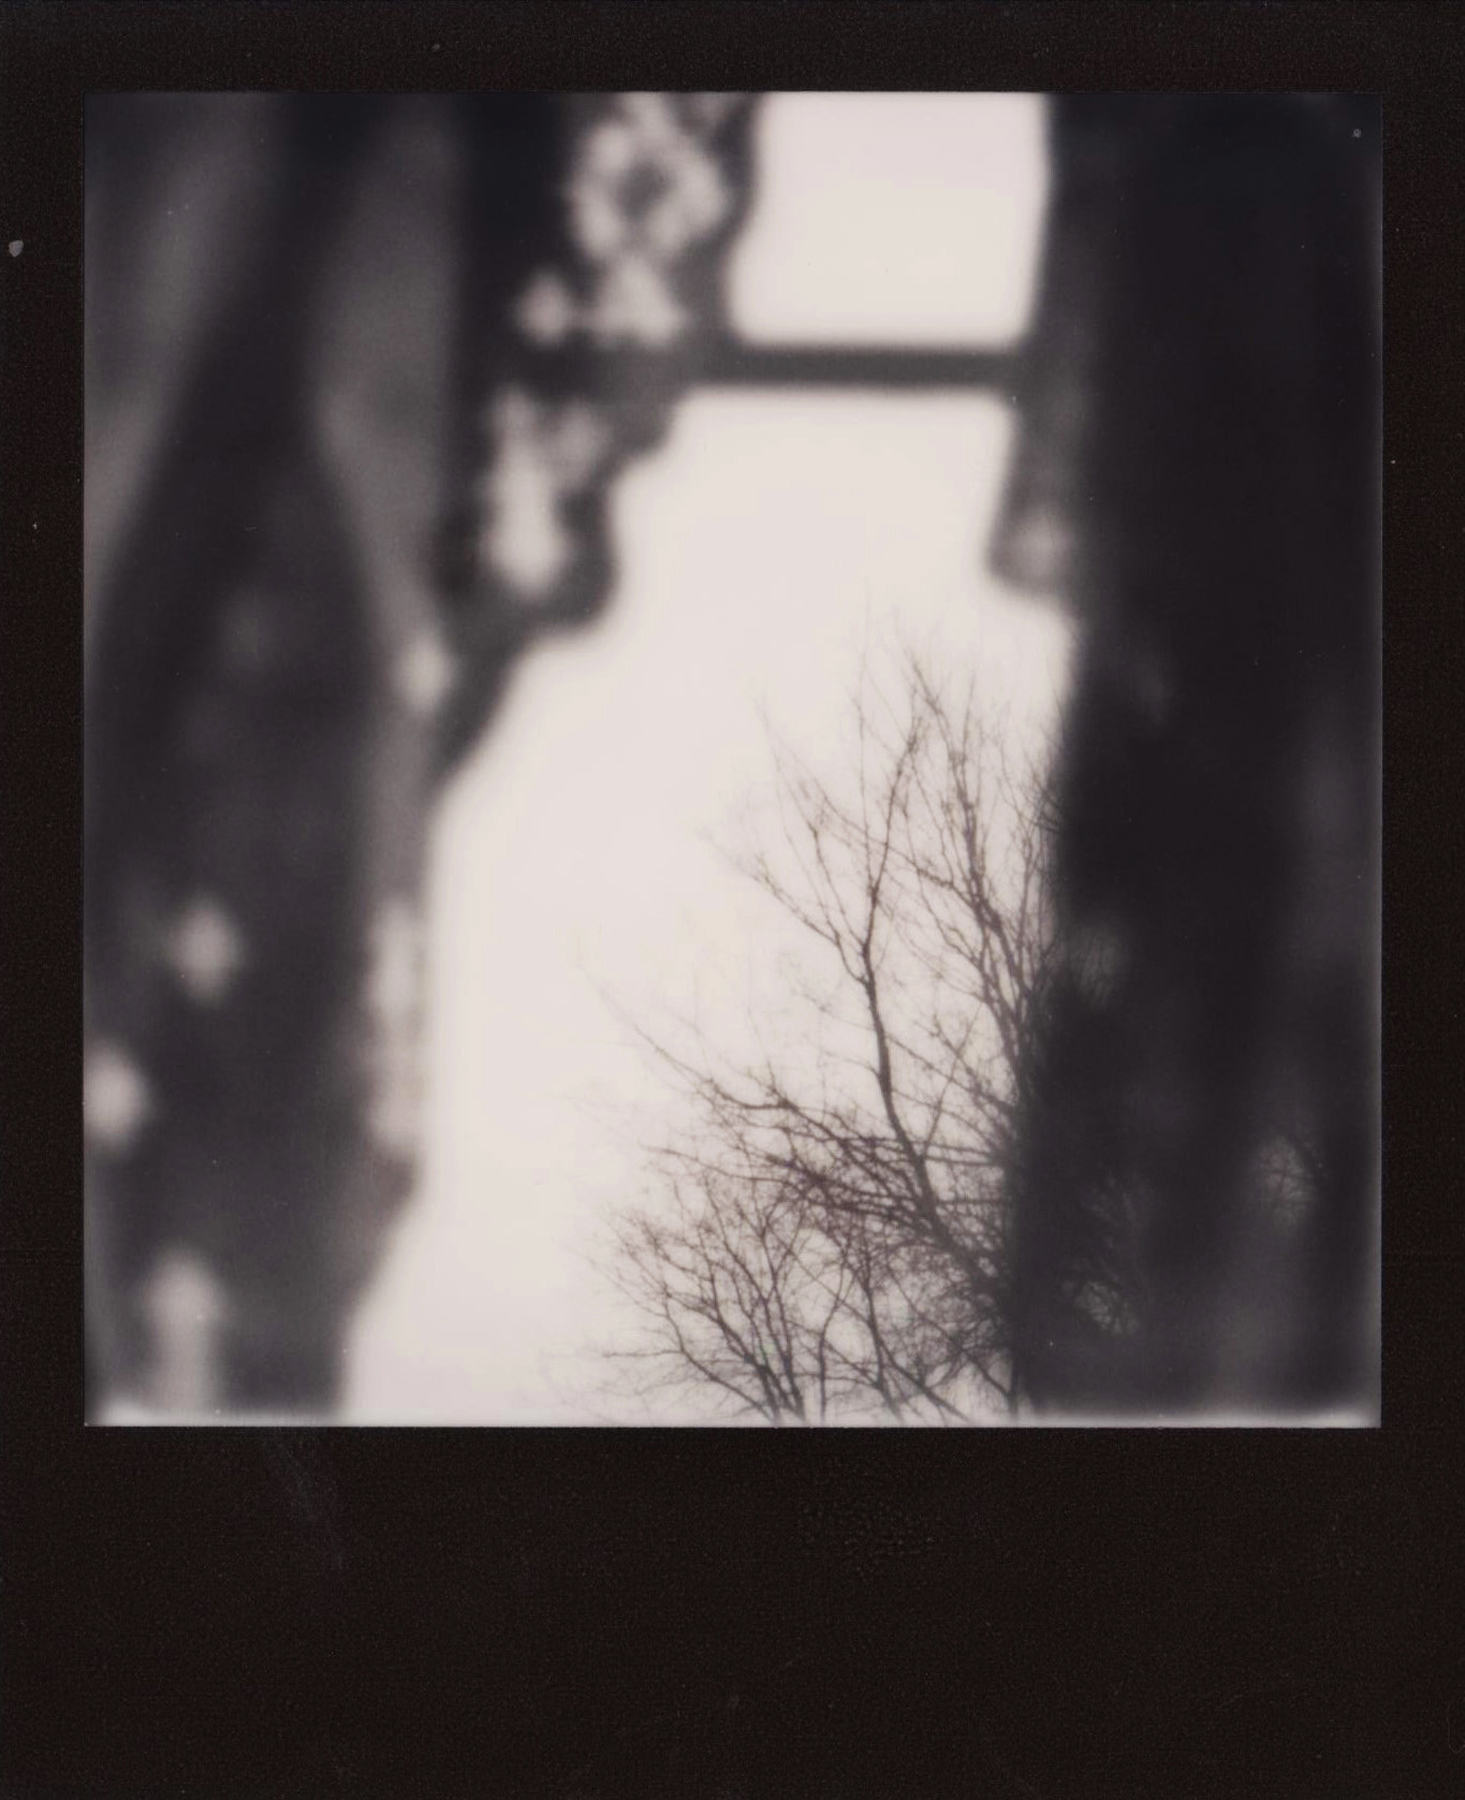  Abigail Crone |&nbsp;Winter Feeling |&nbsp;SX70 |&nbsp;Impossible Project Black and White 